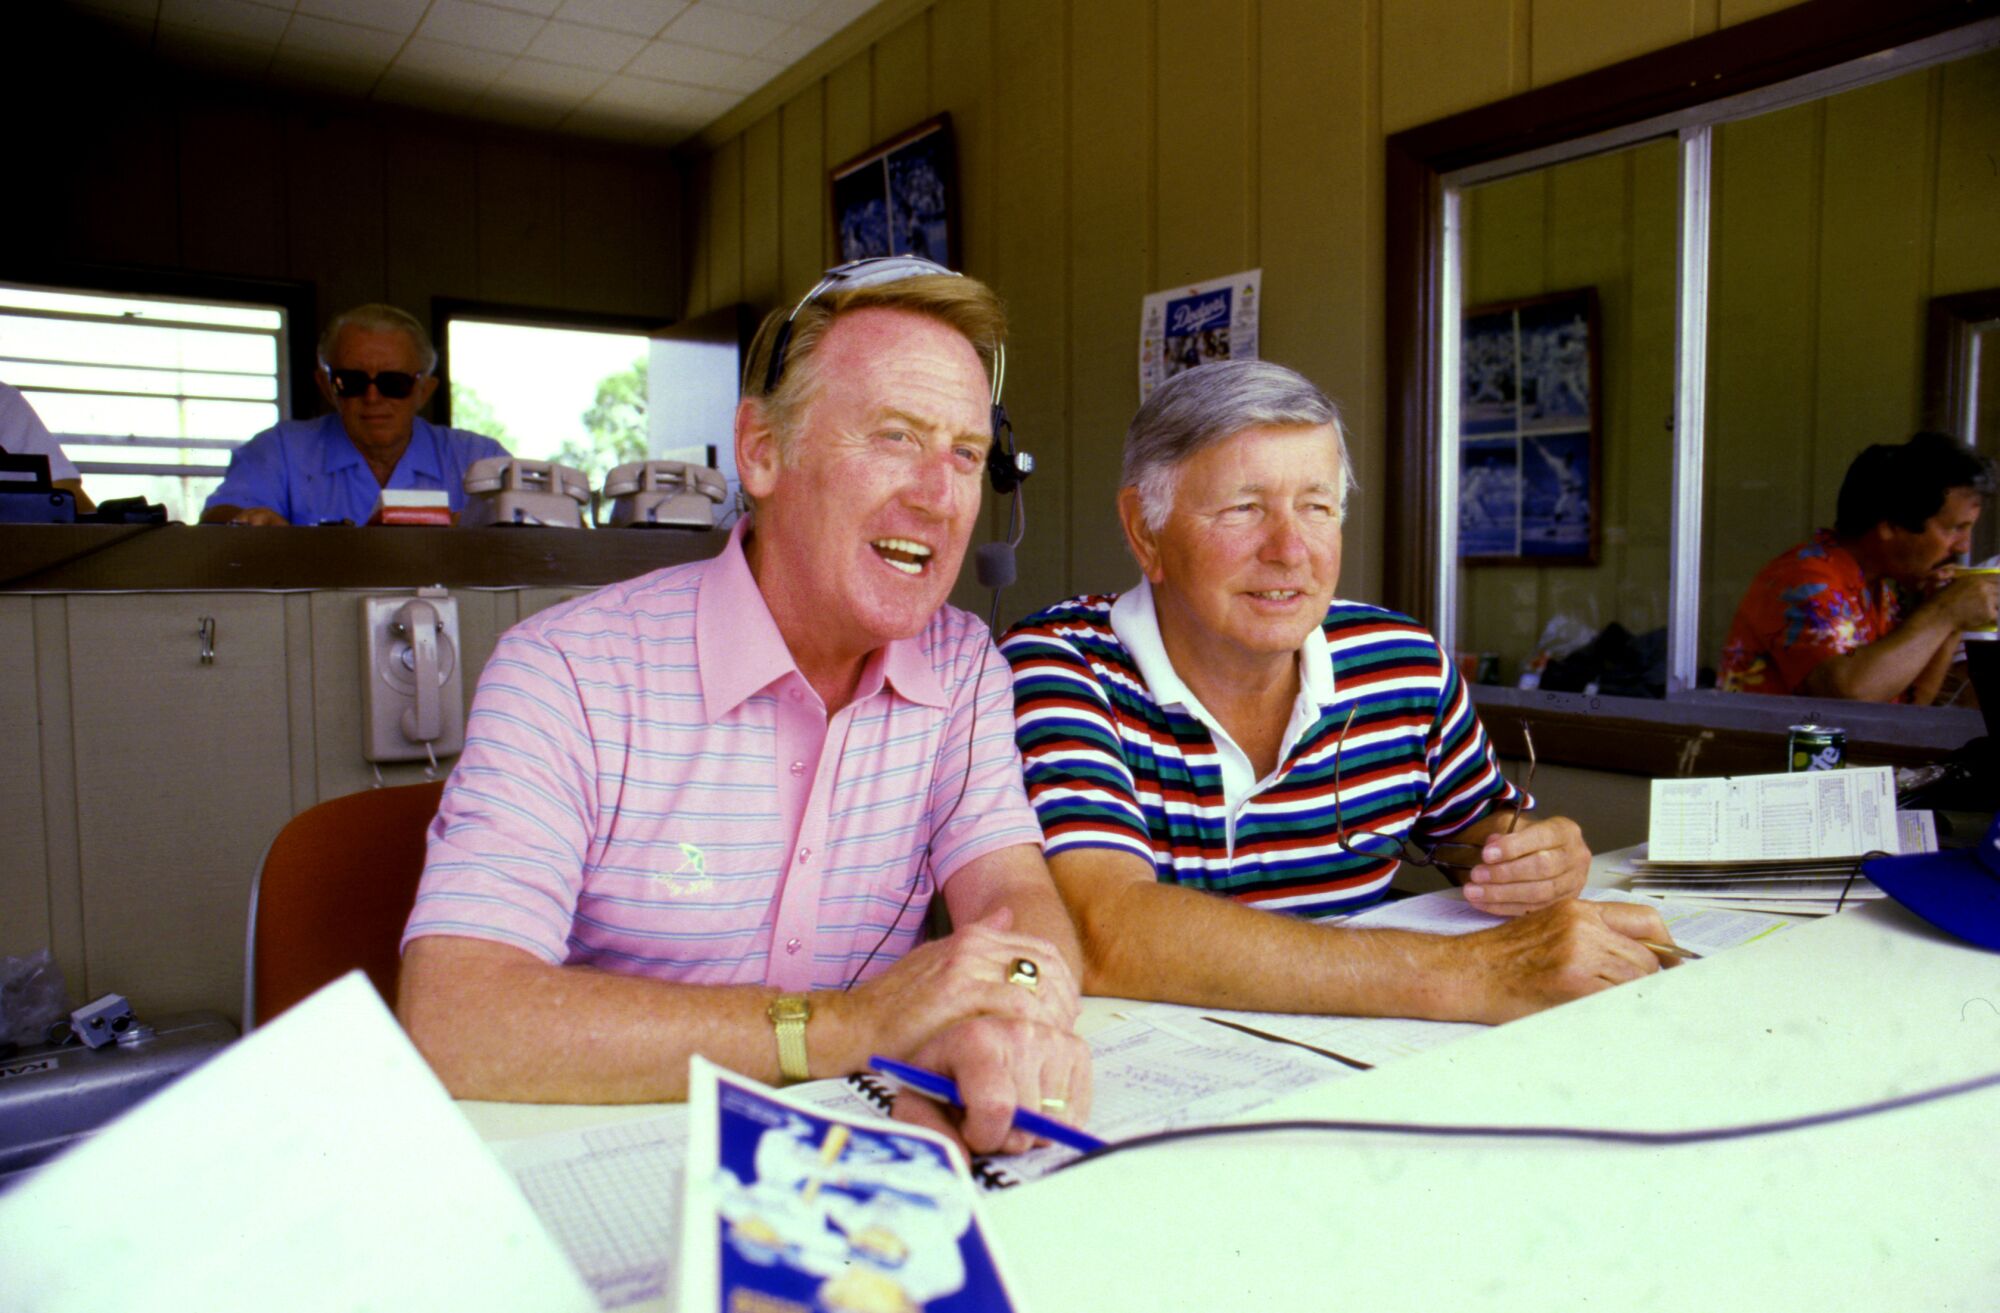 Dodgers broadcaster Vin Scully, left, and Jerry Doggett work in the announcer's booth during a spring training game.